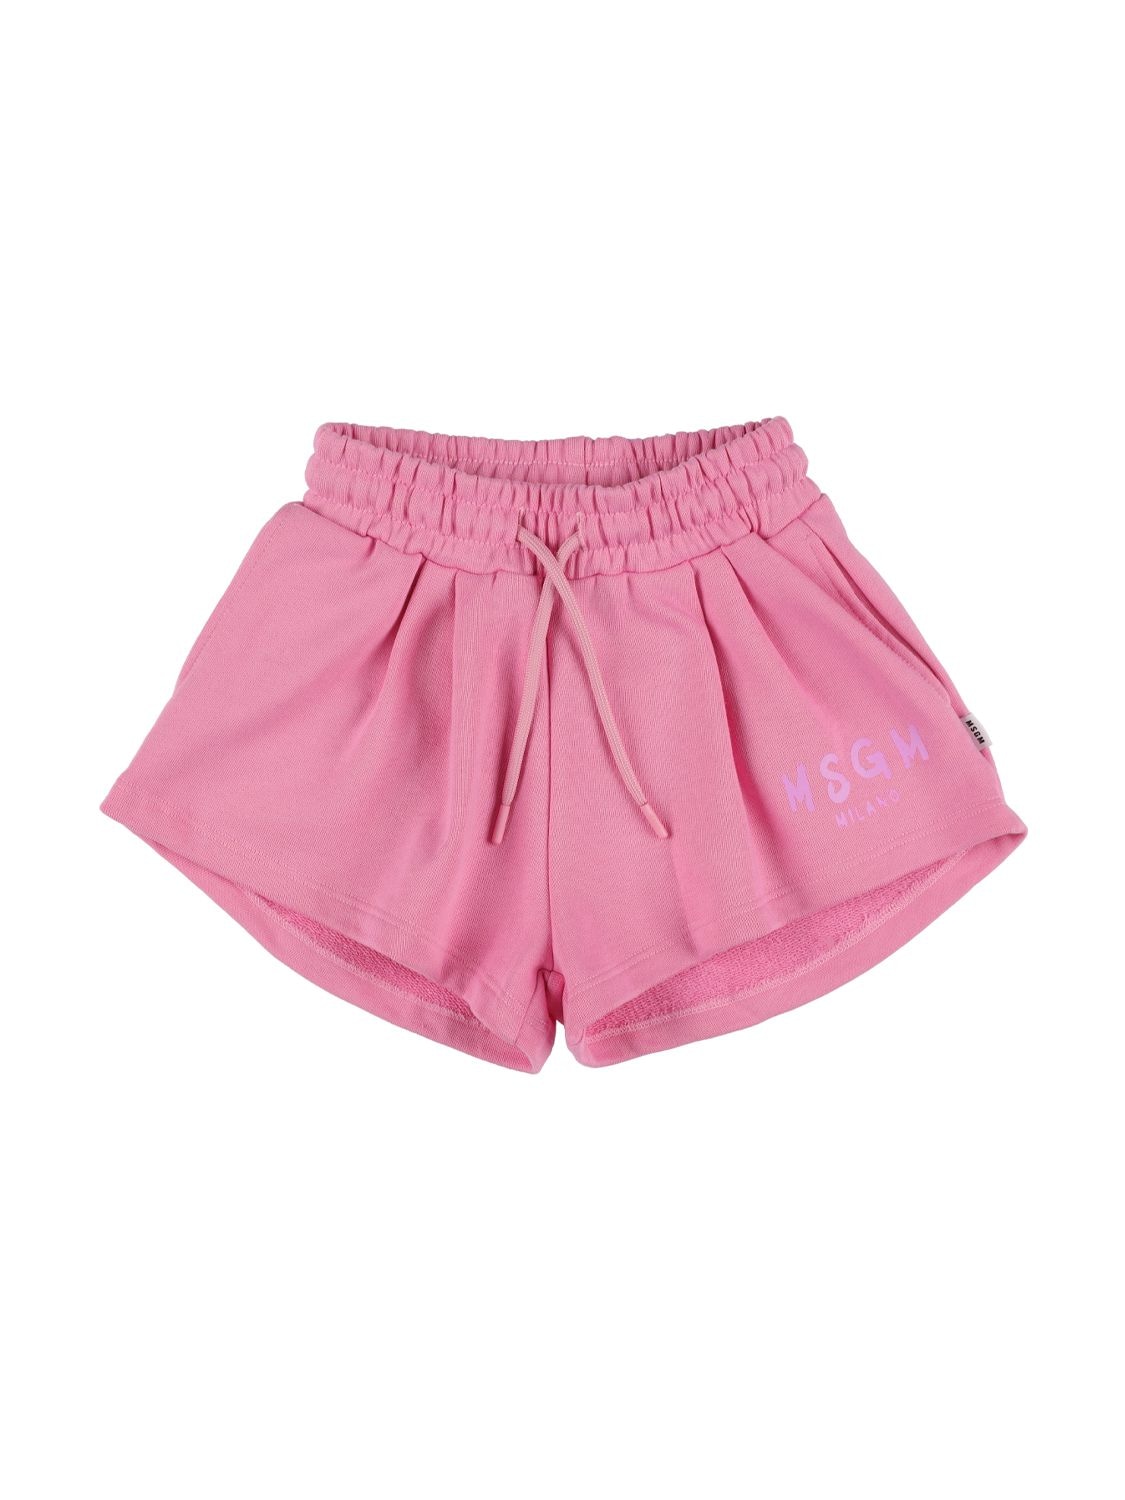 MSGM EMBROIDERED LOGO FRENCH TERRY SHORTS